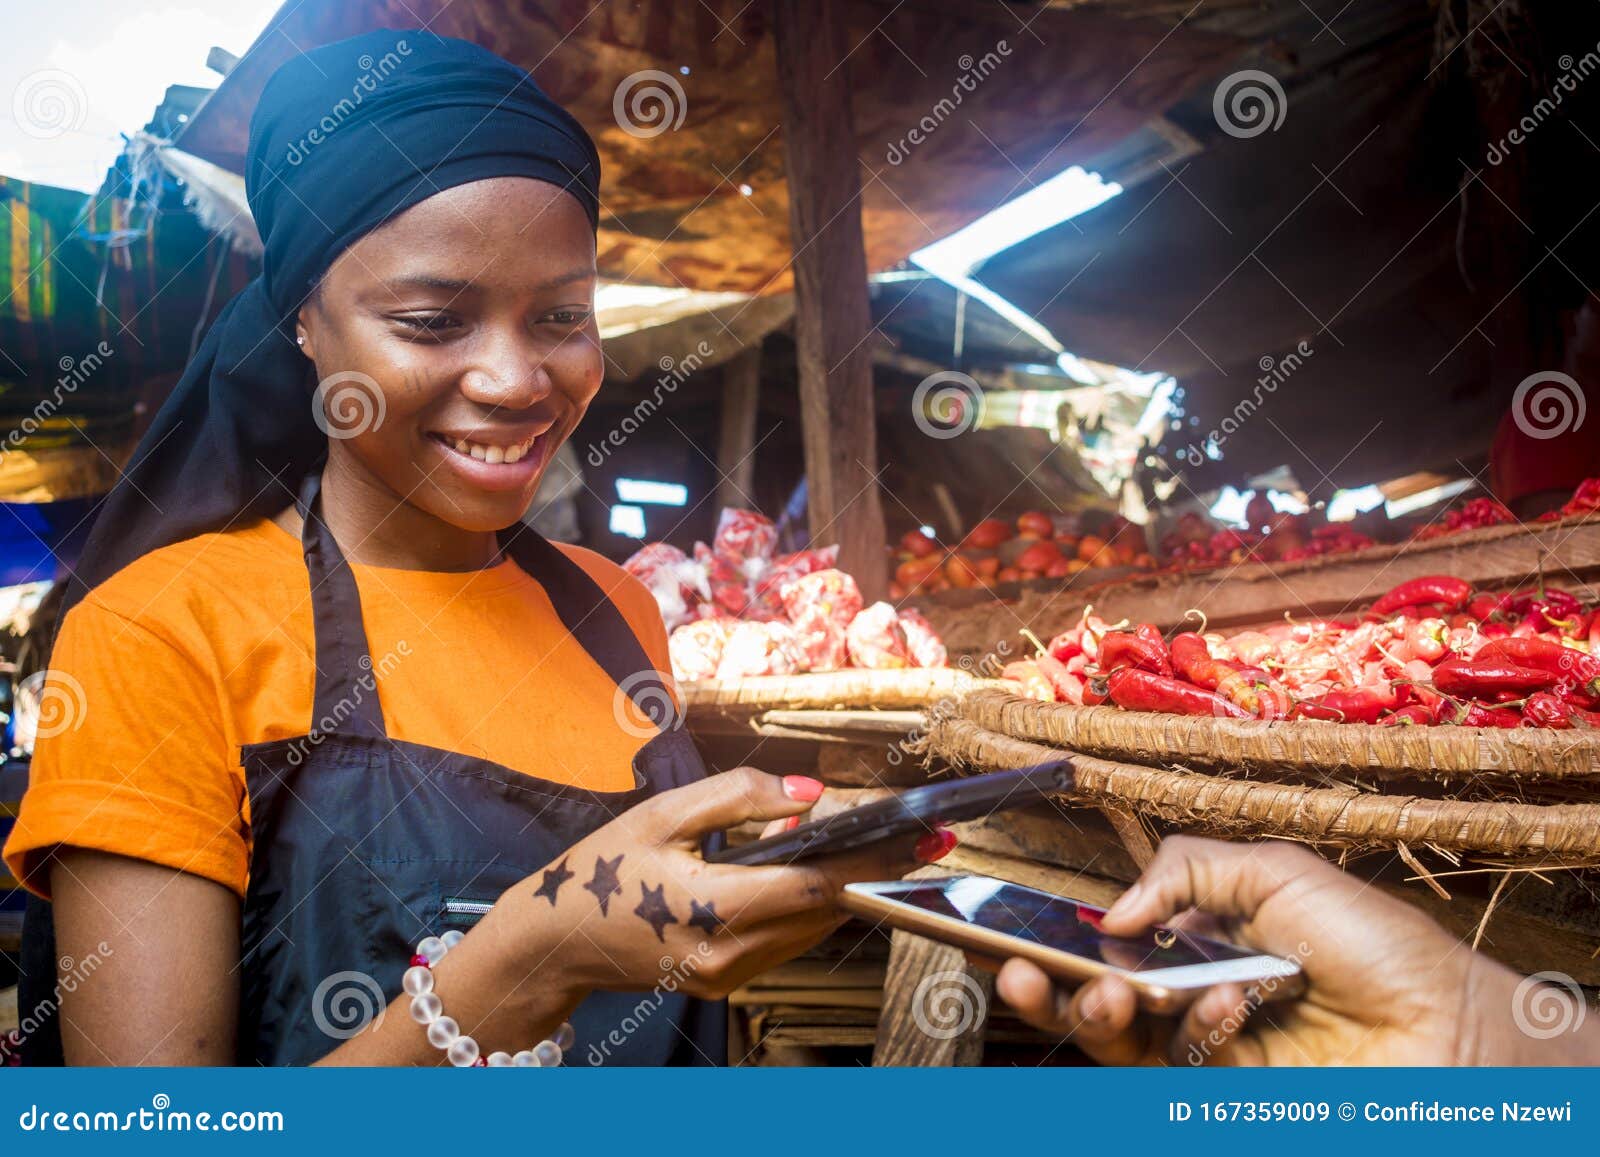 young black woman selling tomatoes in a local african market receiving payment via mobile phone transfer